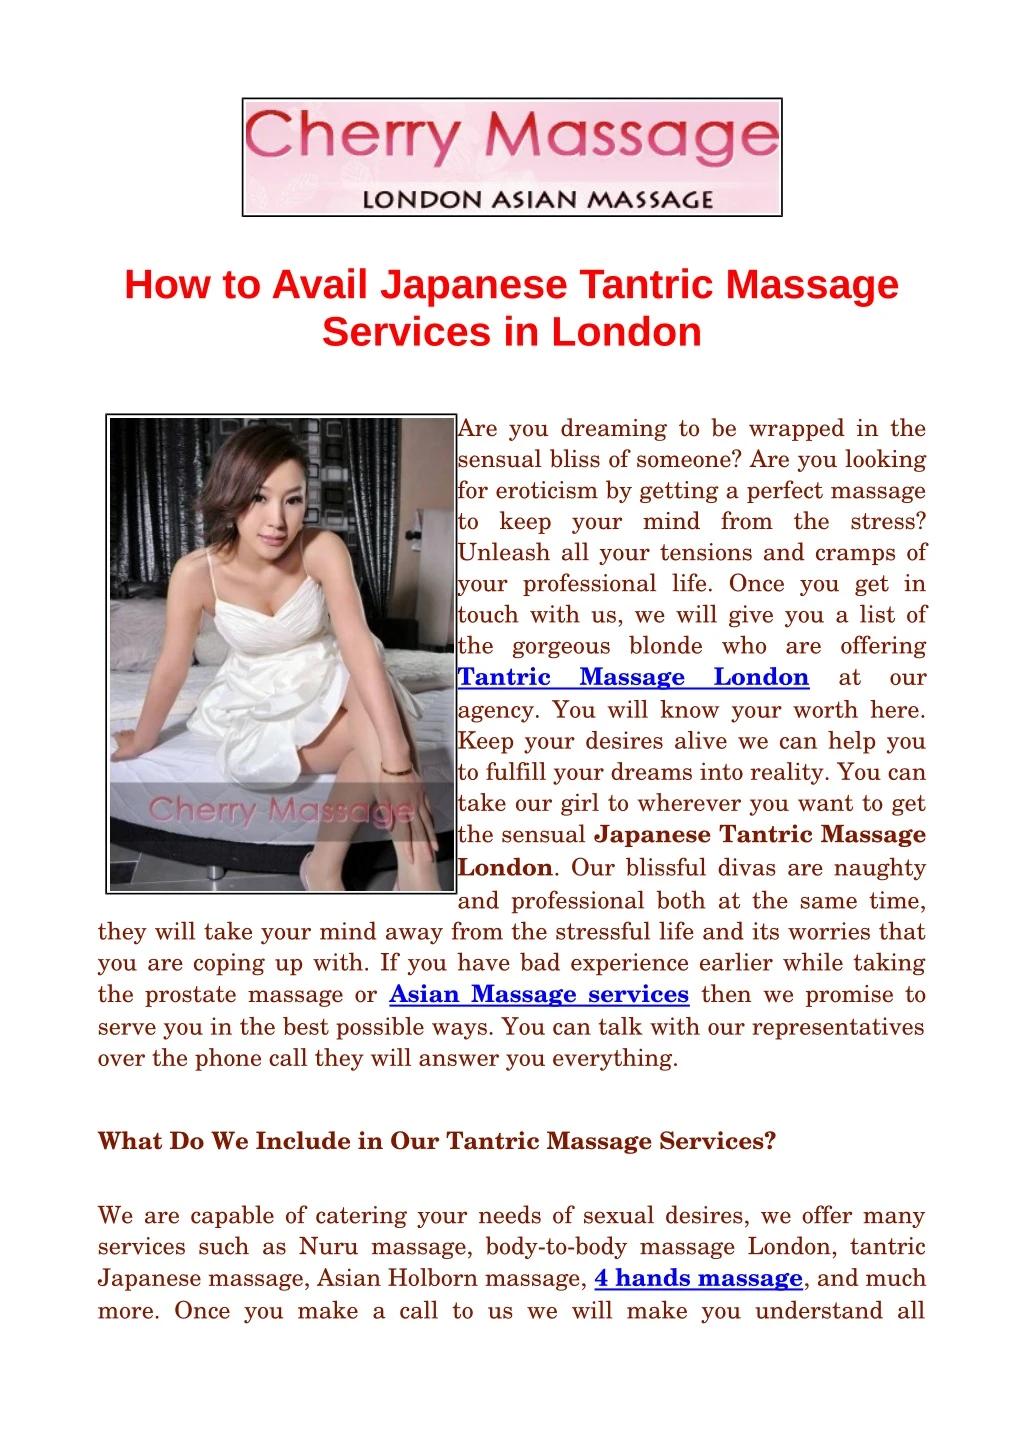 how to avail japanese tantric massage services